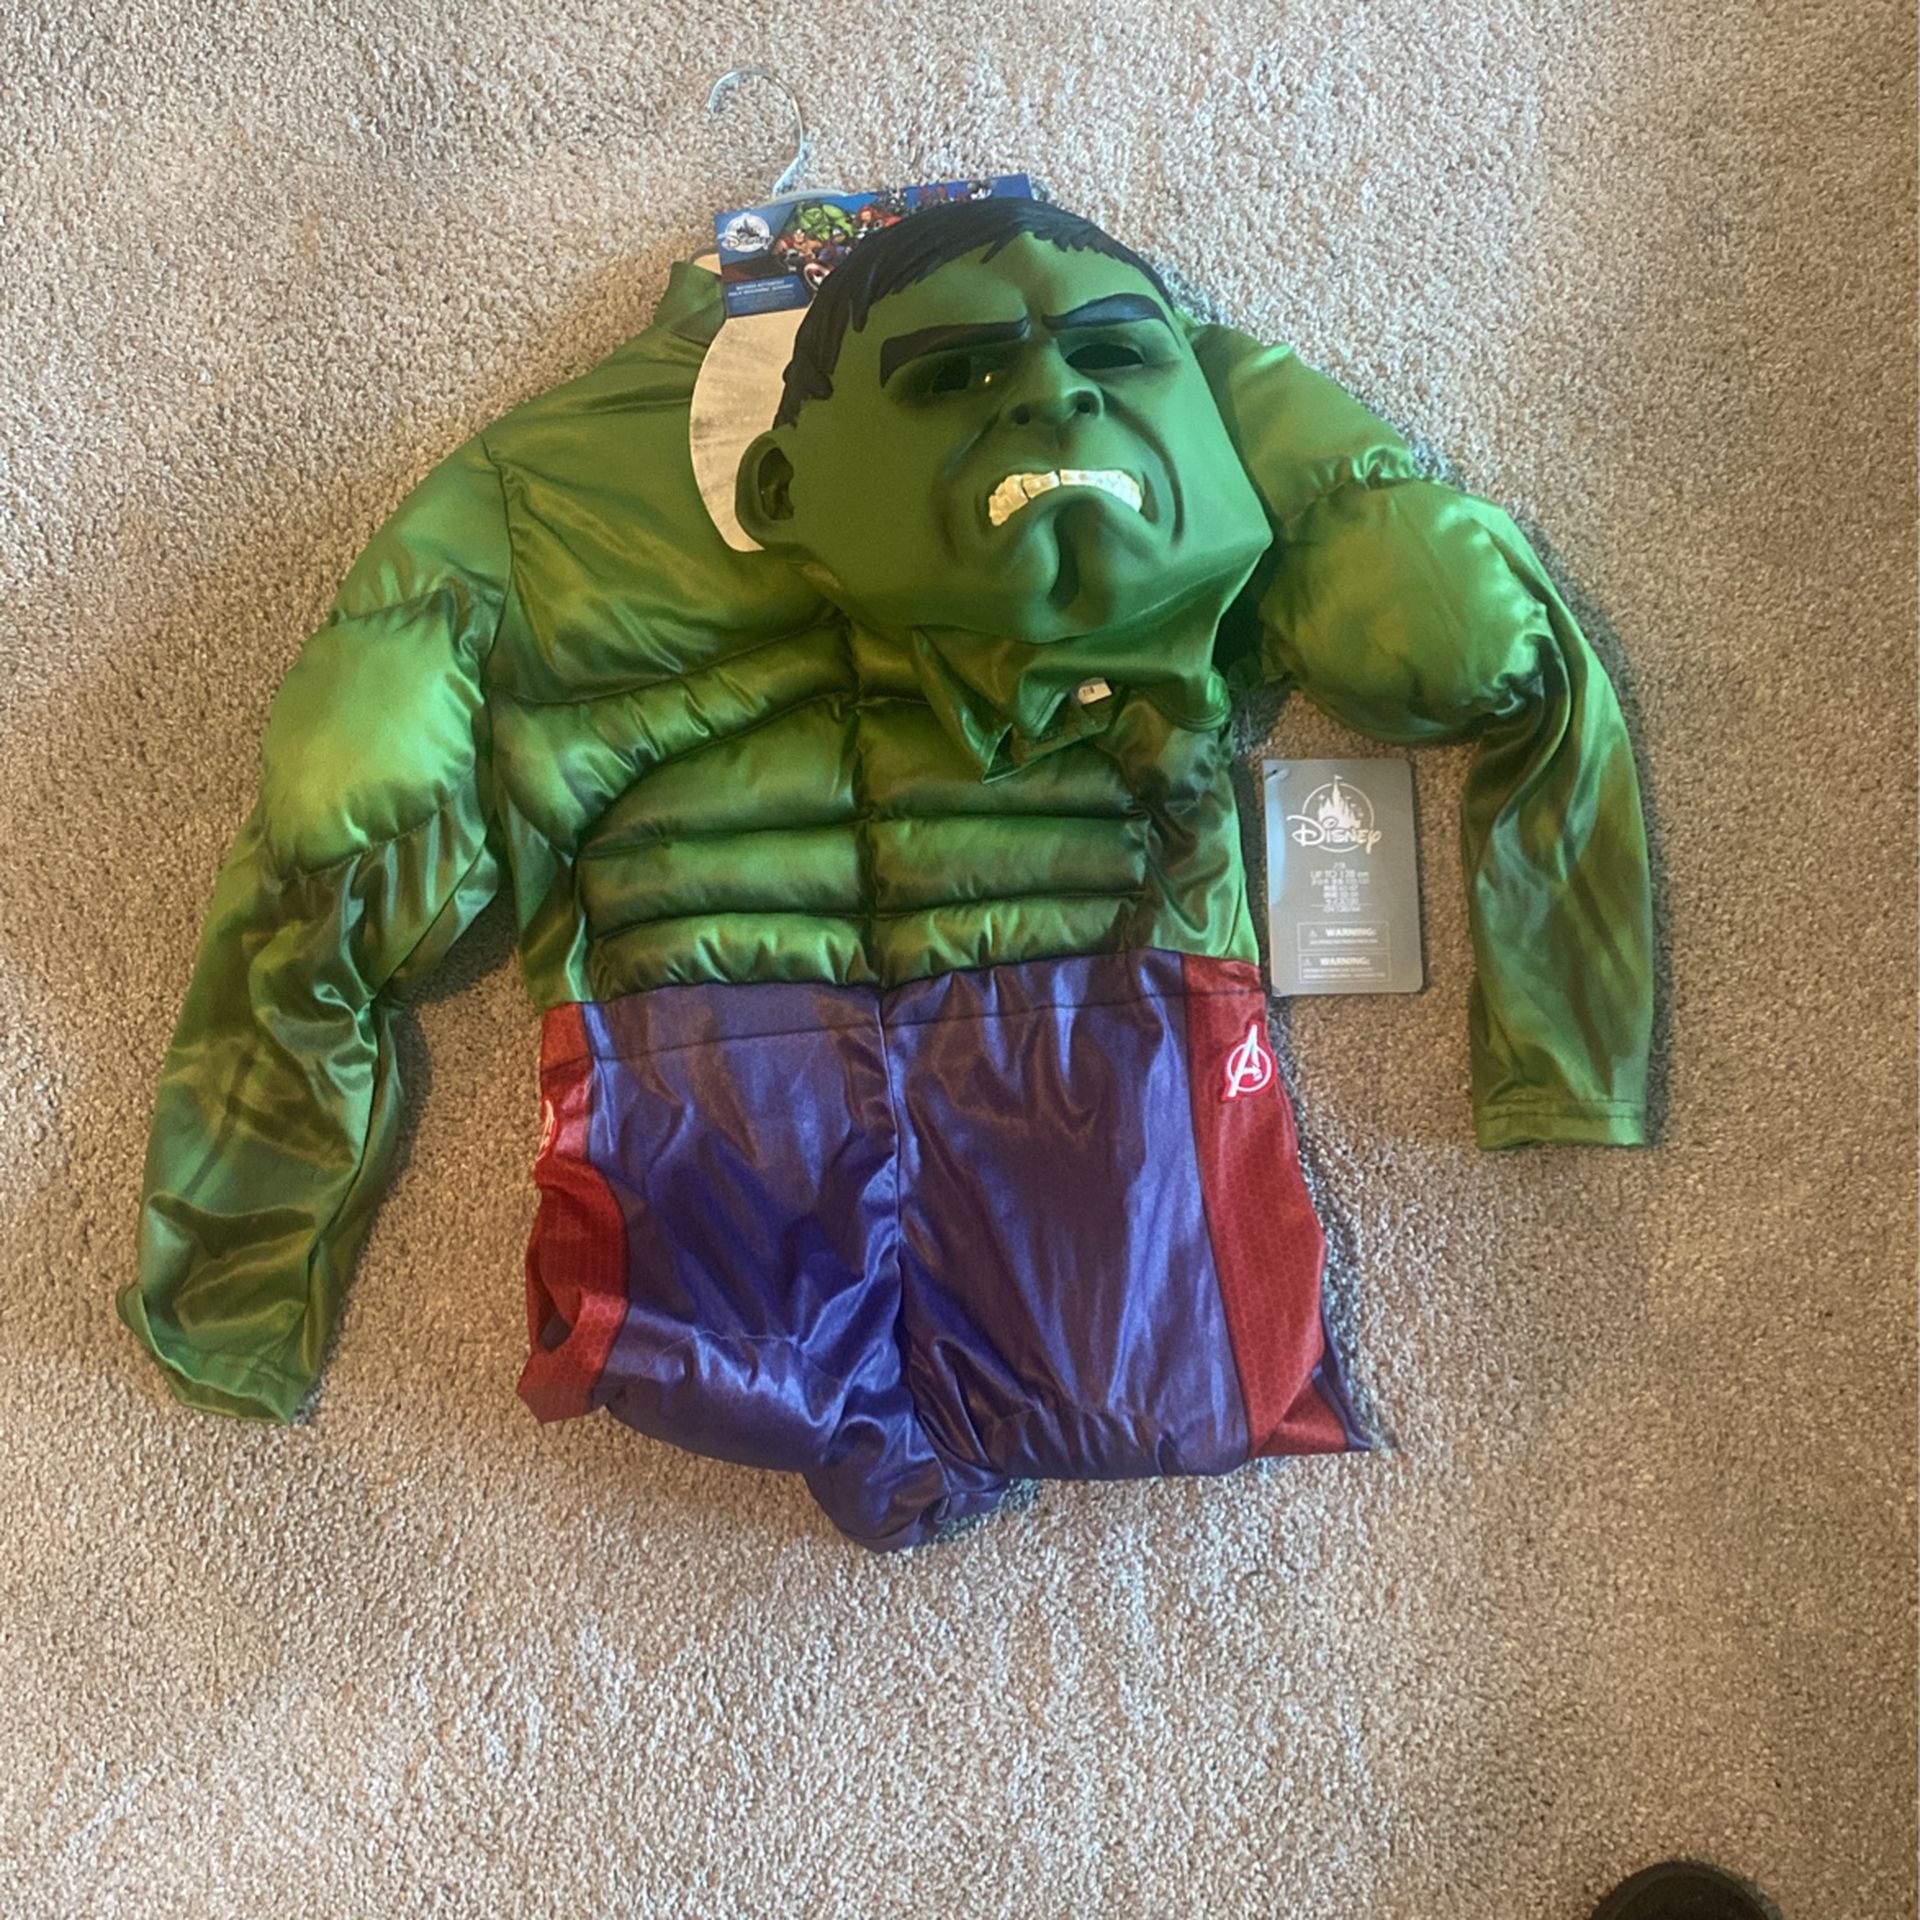 Disney Store Hulk Costume Size 7/8- New With Tags